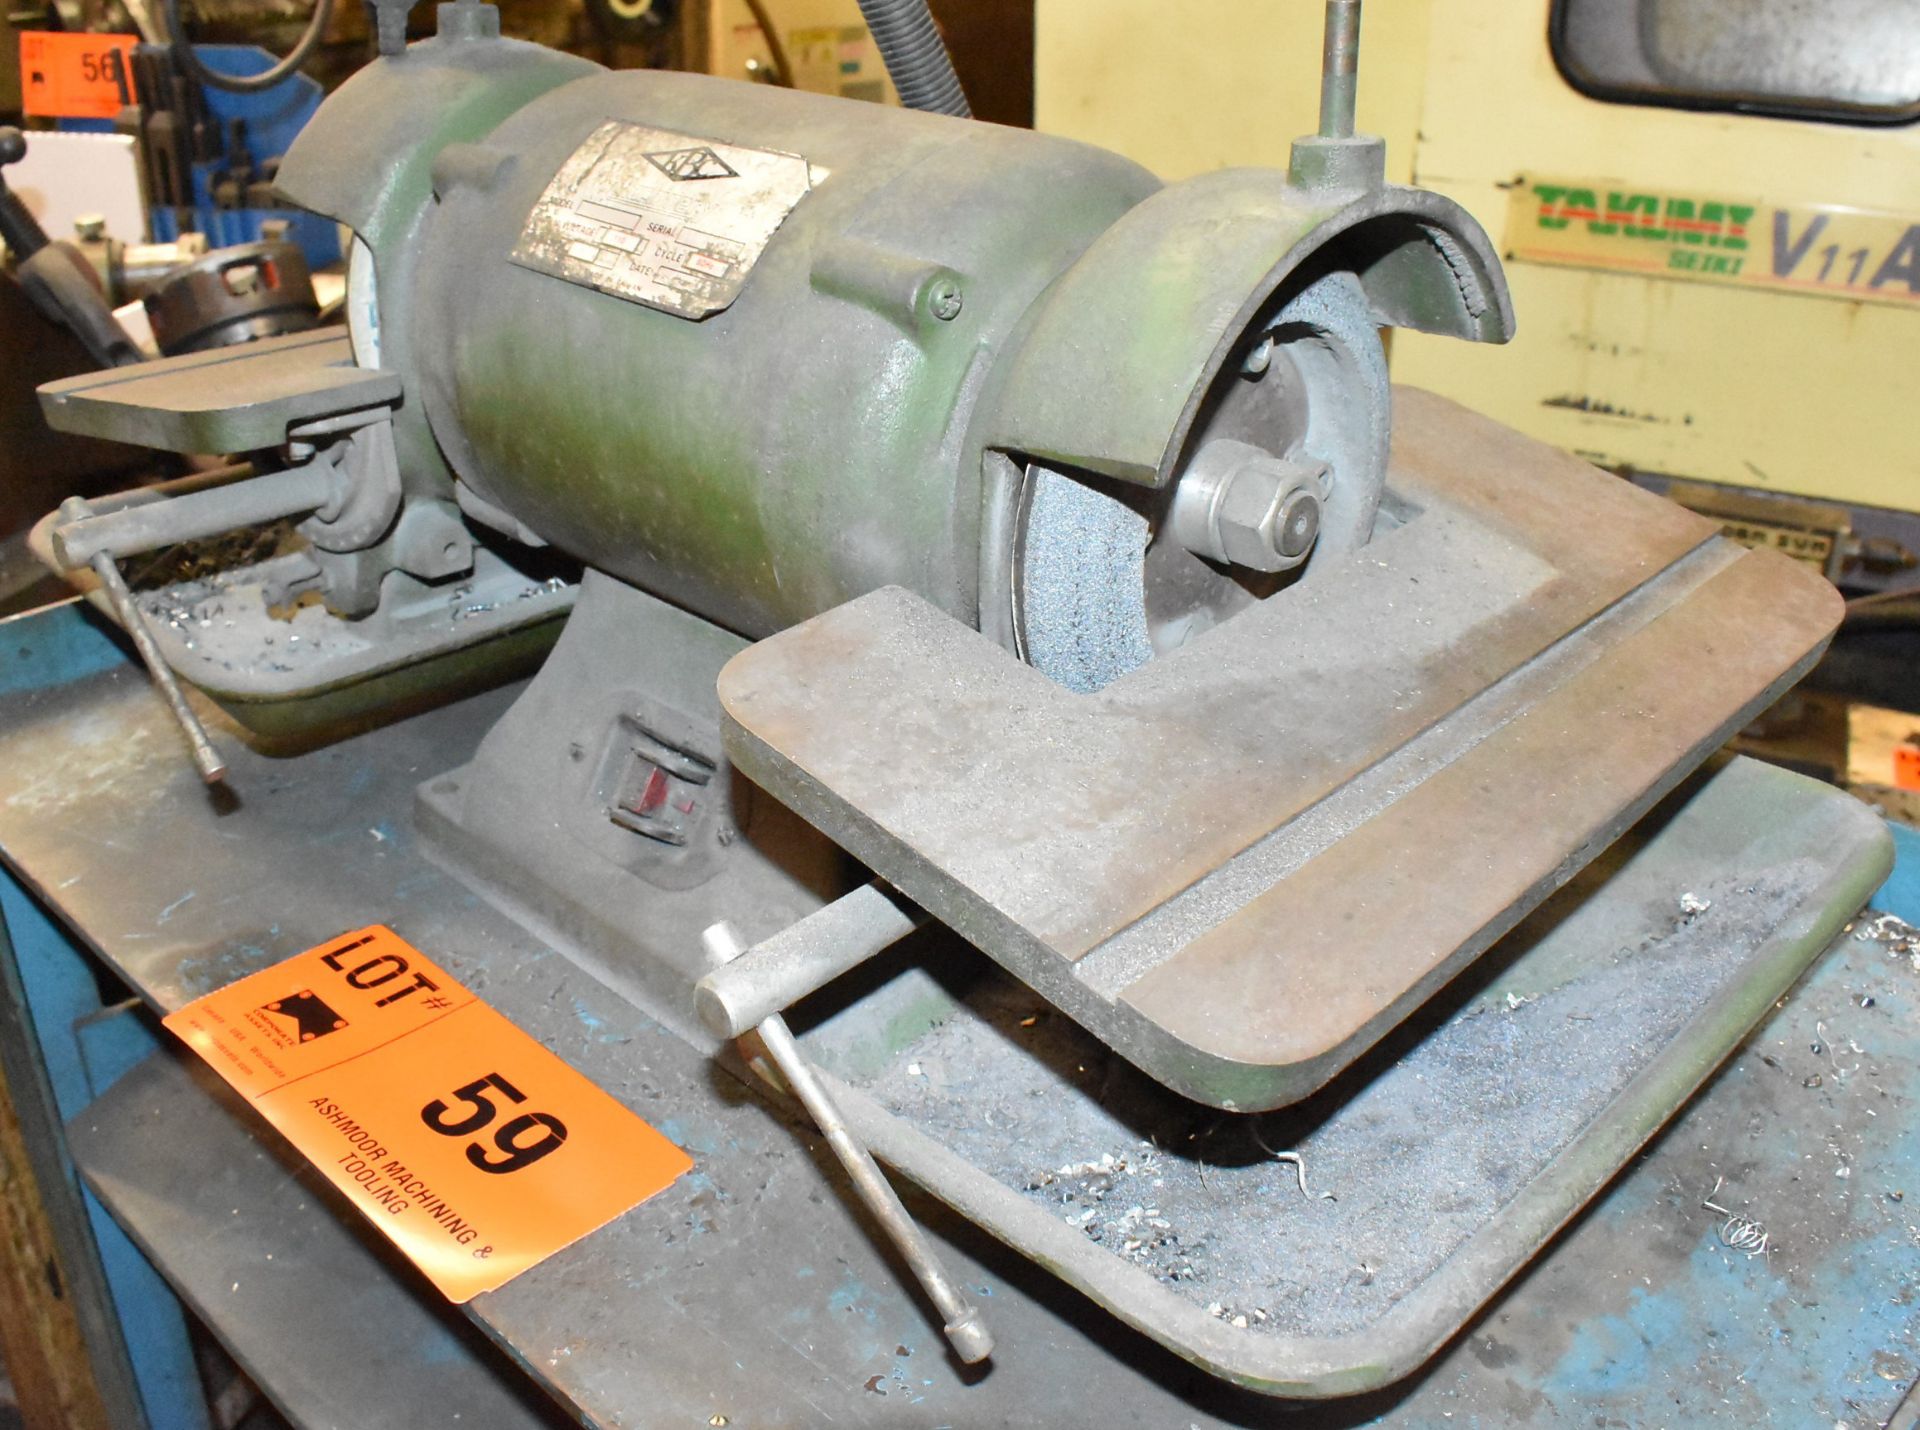 KBC 6" DOUBLE END BENCH GRINDER WITH CART - Image 3 of 4